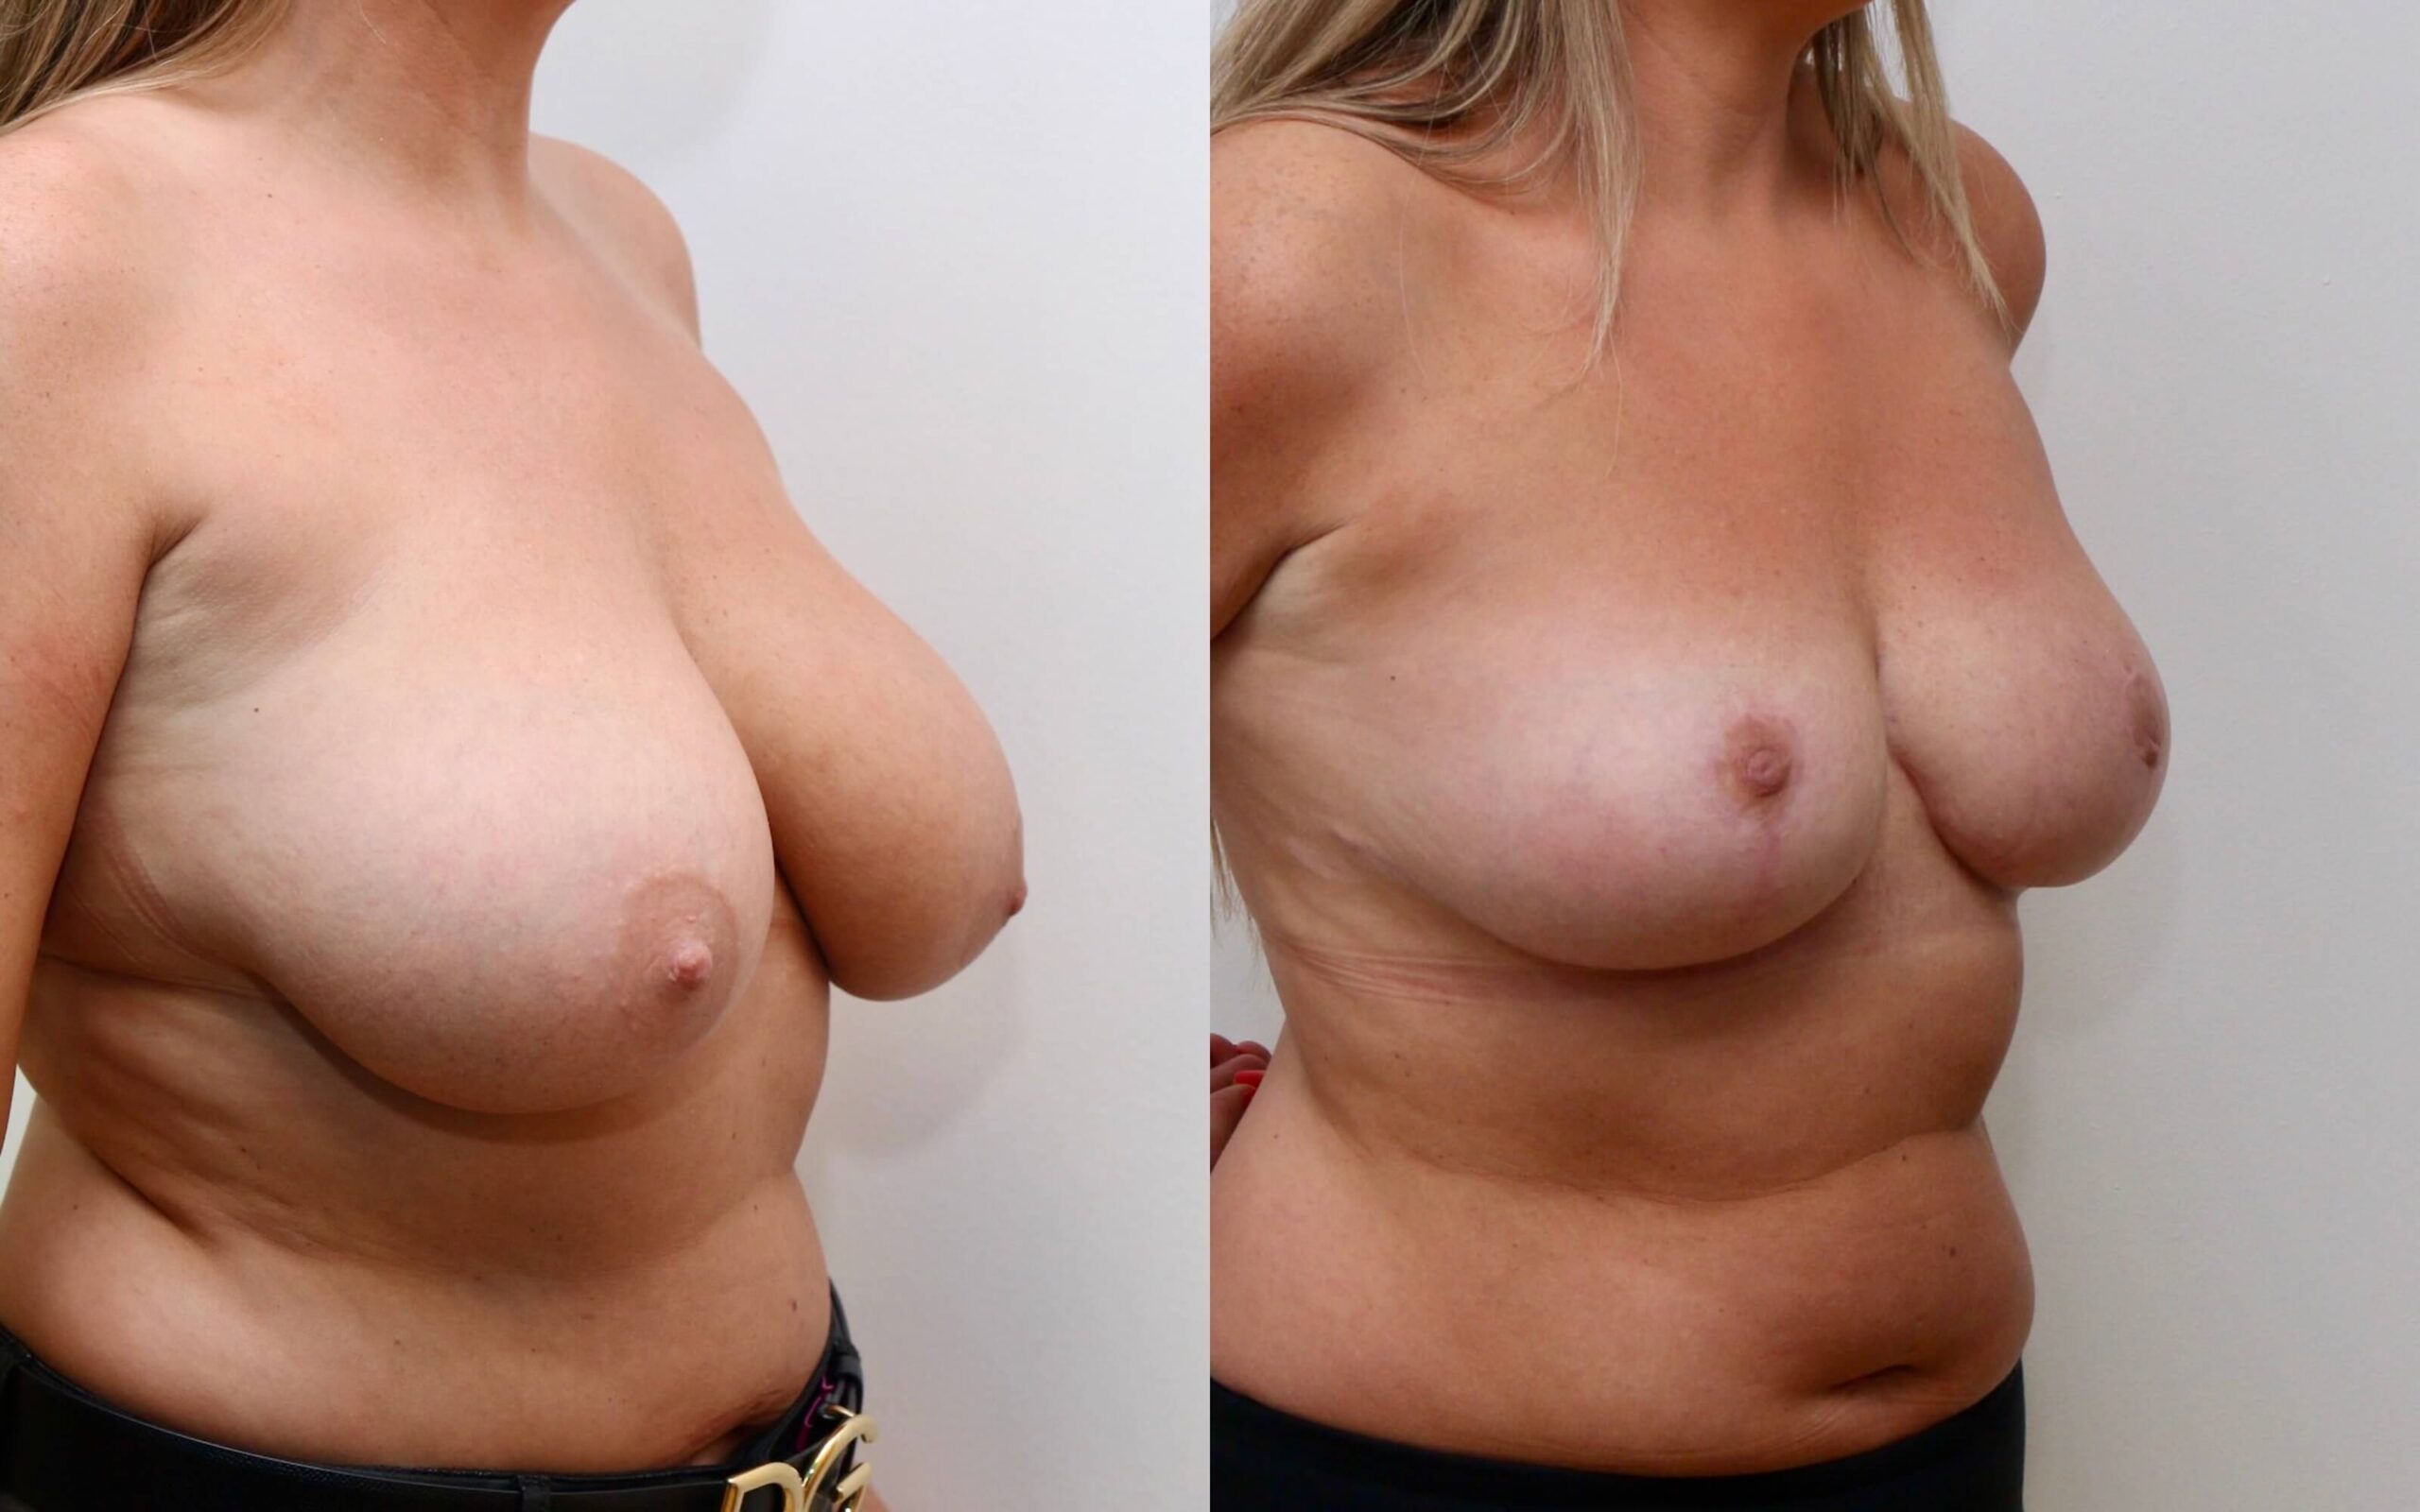 Breast uplift and correction of asymmetry